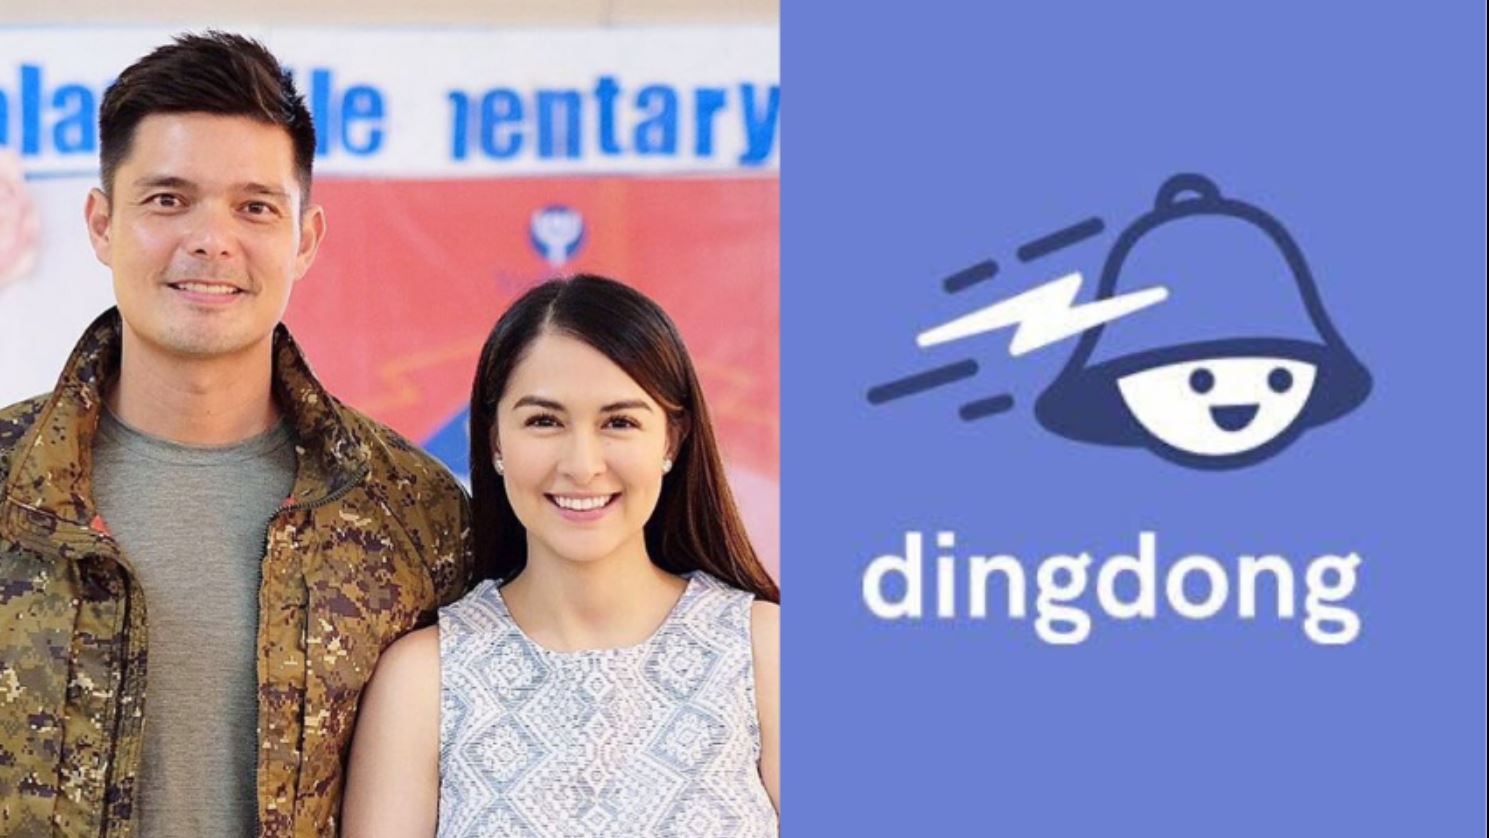 Dingdong Marian delivery service